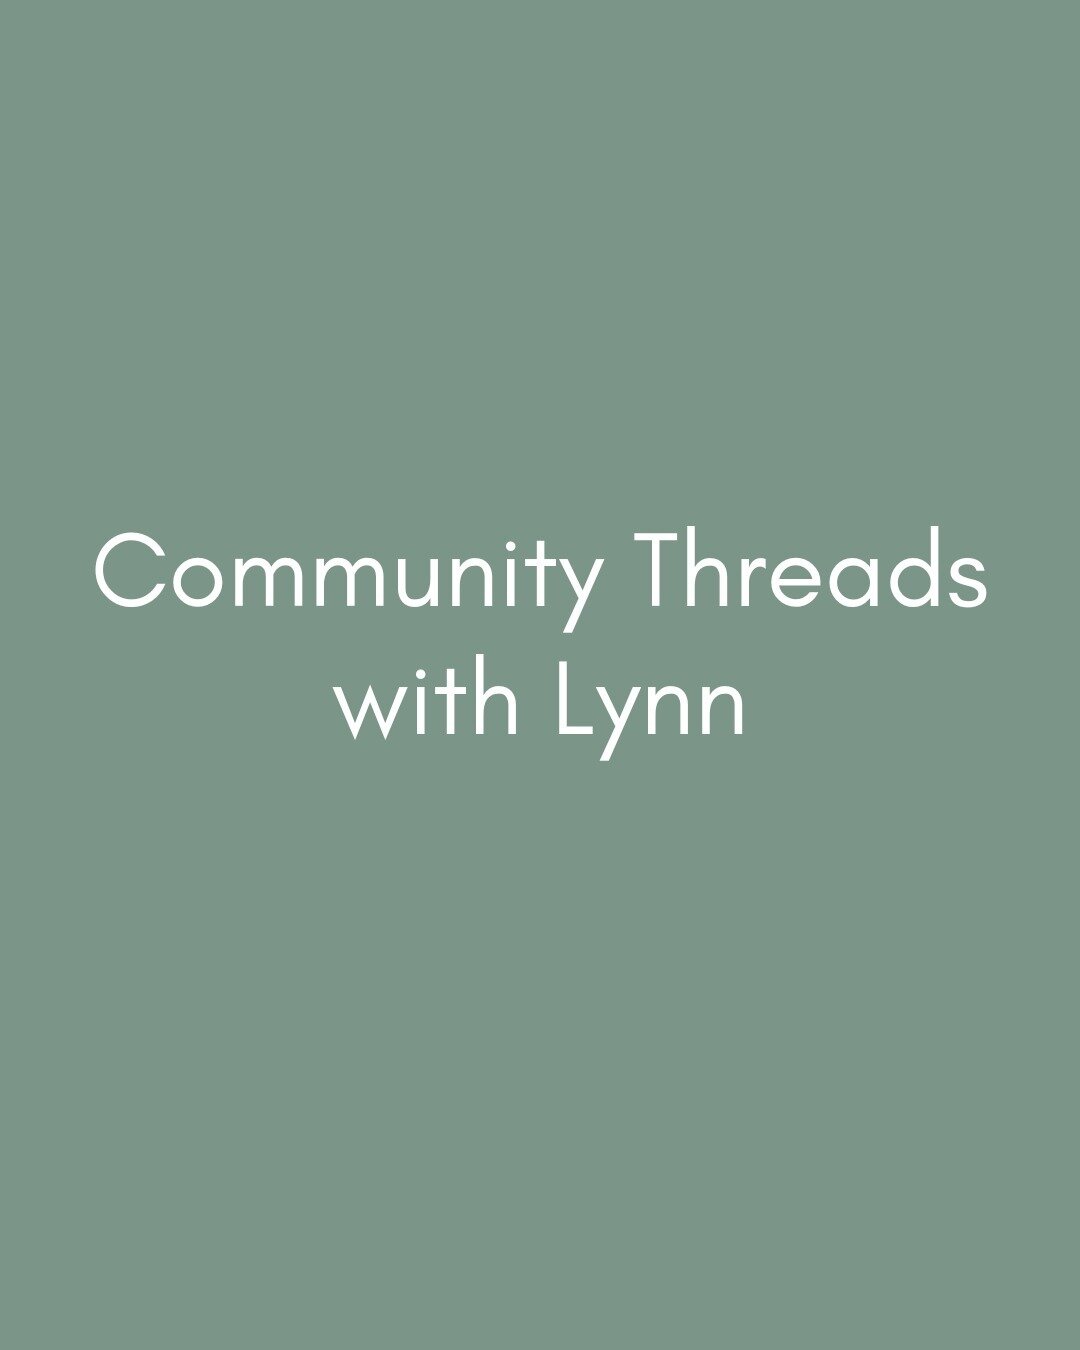 Gather together with Lynn this Sunday at 3:00PM for Community Threads. Slow down, follow our intuition and explore the ritual of mending something worn - one stitch at a time.

An old idea is new again as we commune, work with our hands, explore crea